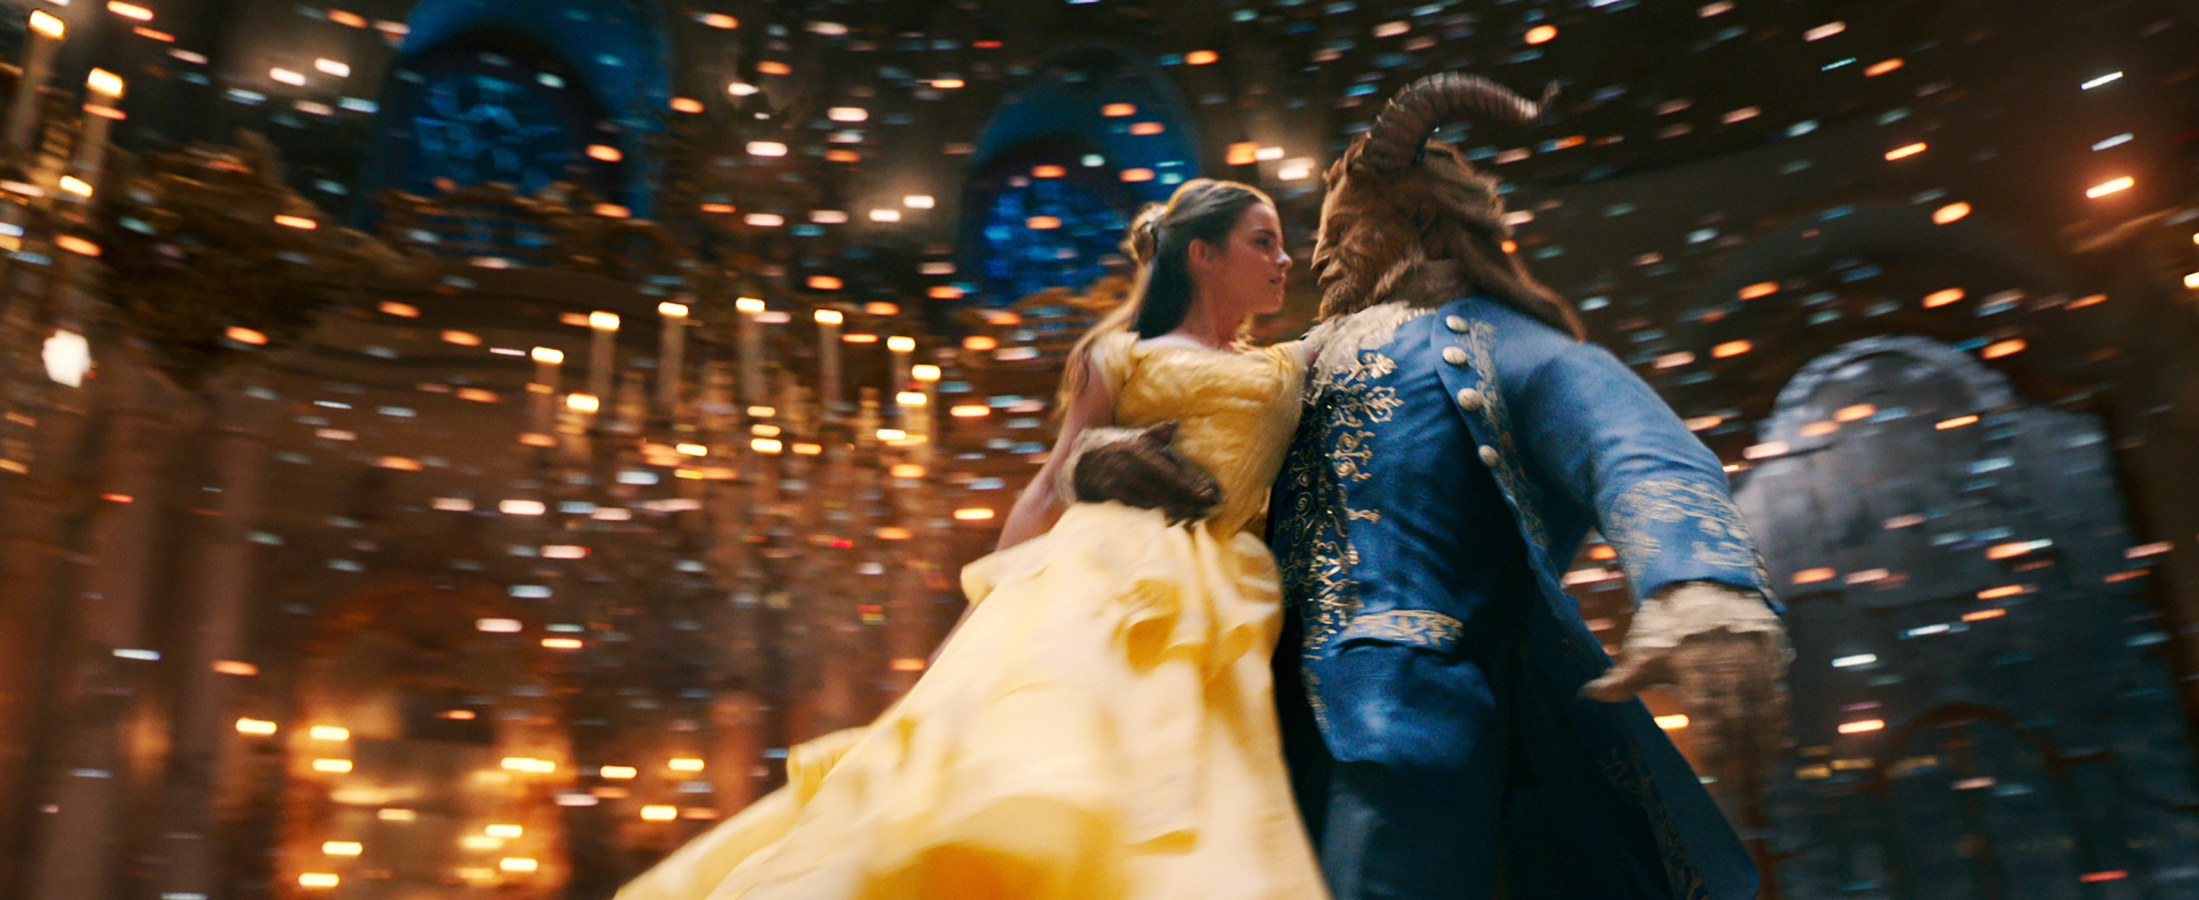 Emma Watson and Dan Stevens dancing in the infamous ballroom scene in Beauty and the Beast